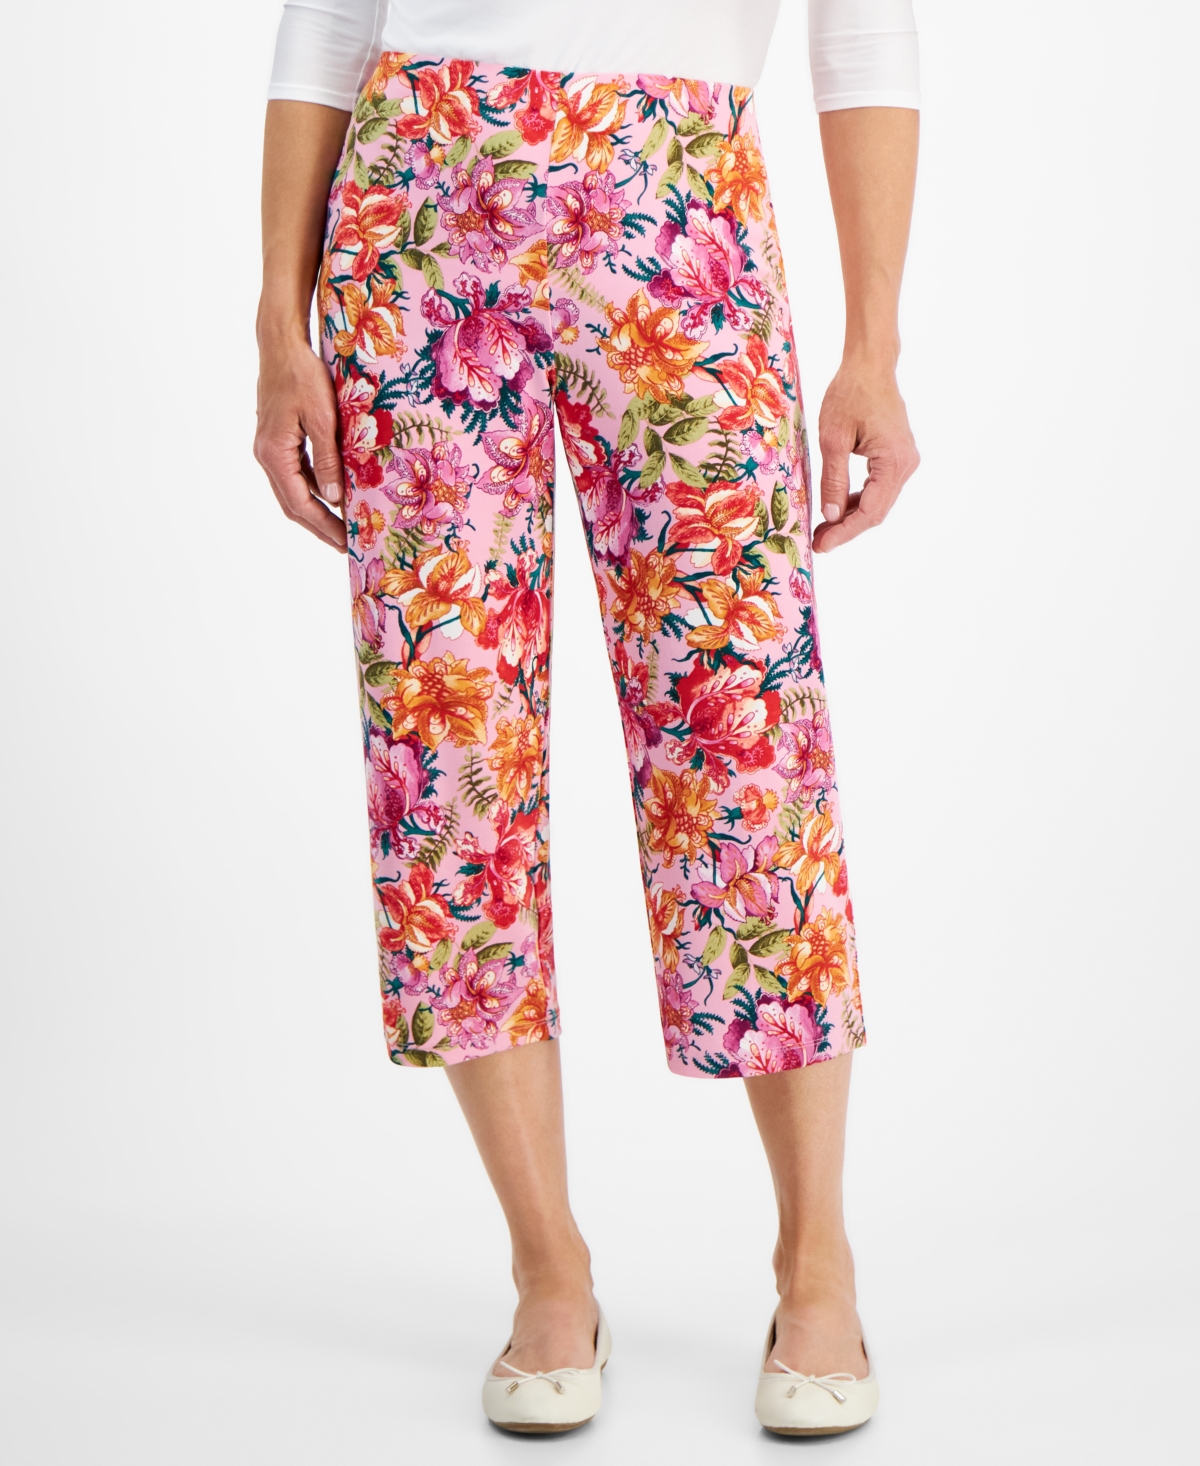 Petite Paradise Gardenia Culotte Pants, Created for Macy's - Blossom Berry Combo